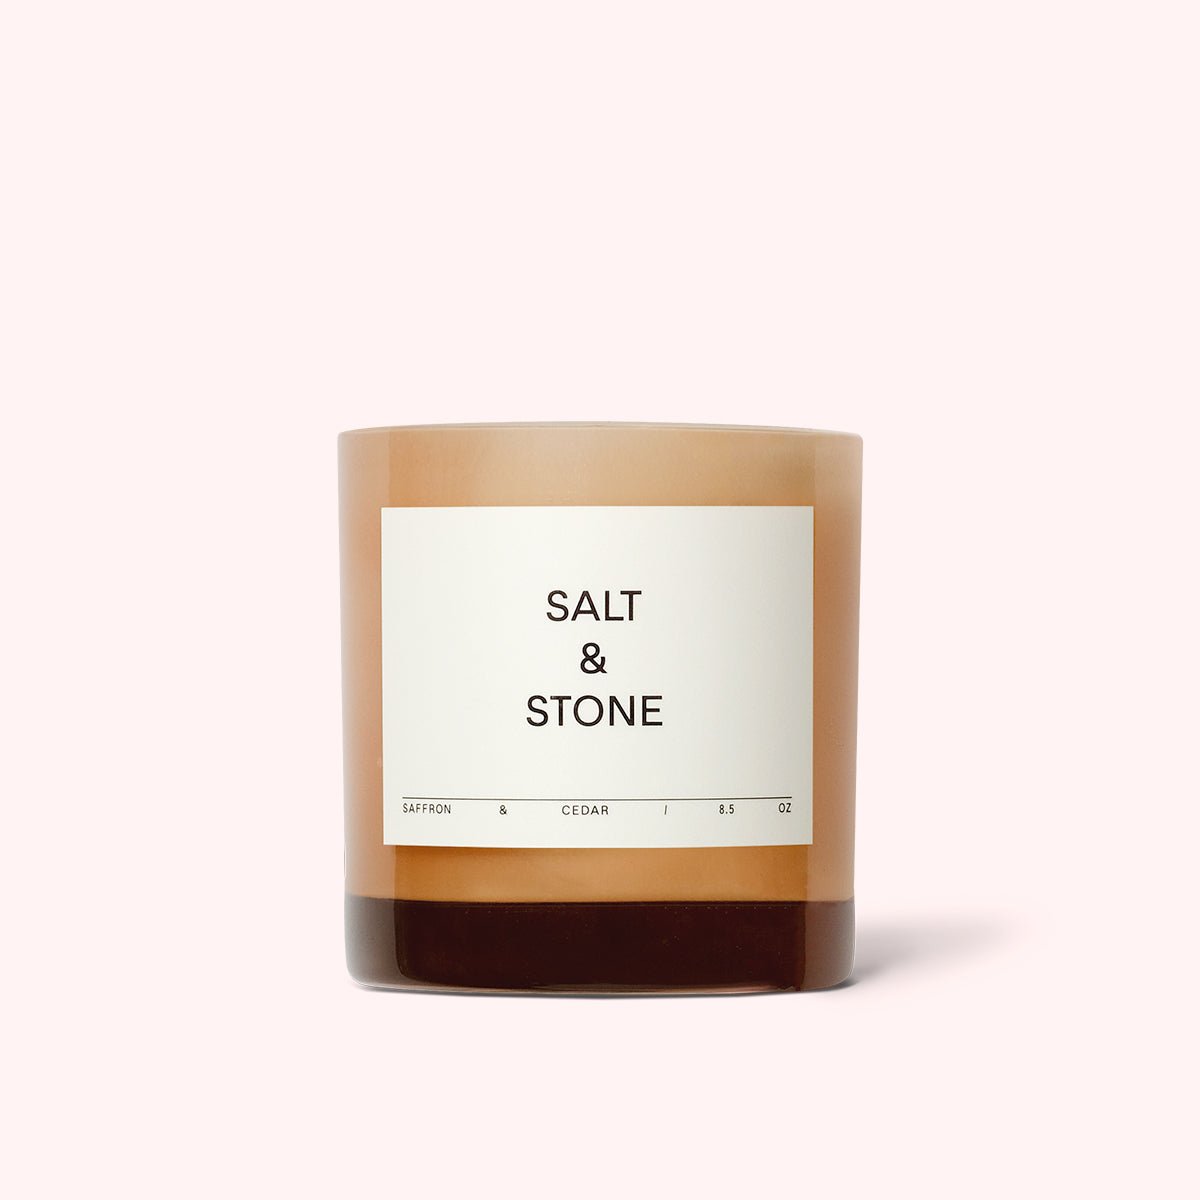 Light pink glass jar filled with a coconut and soy wax candle. The Saffron & Cedar Candle is designed by Salt & Stone and made in Los Angeles, CA.